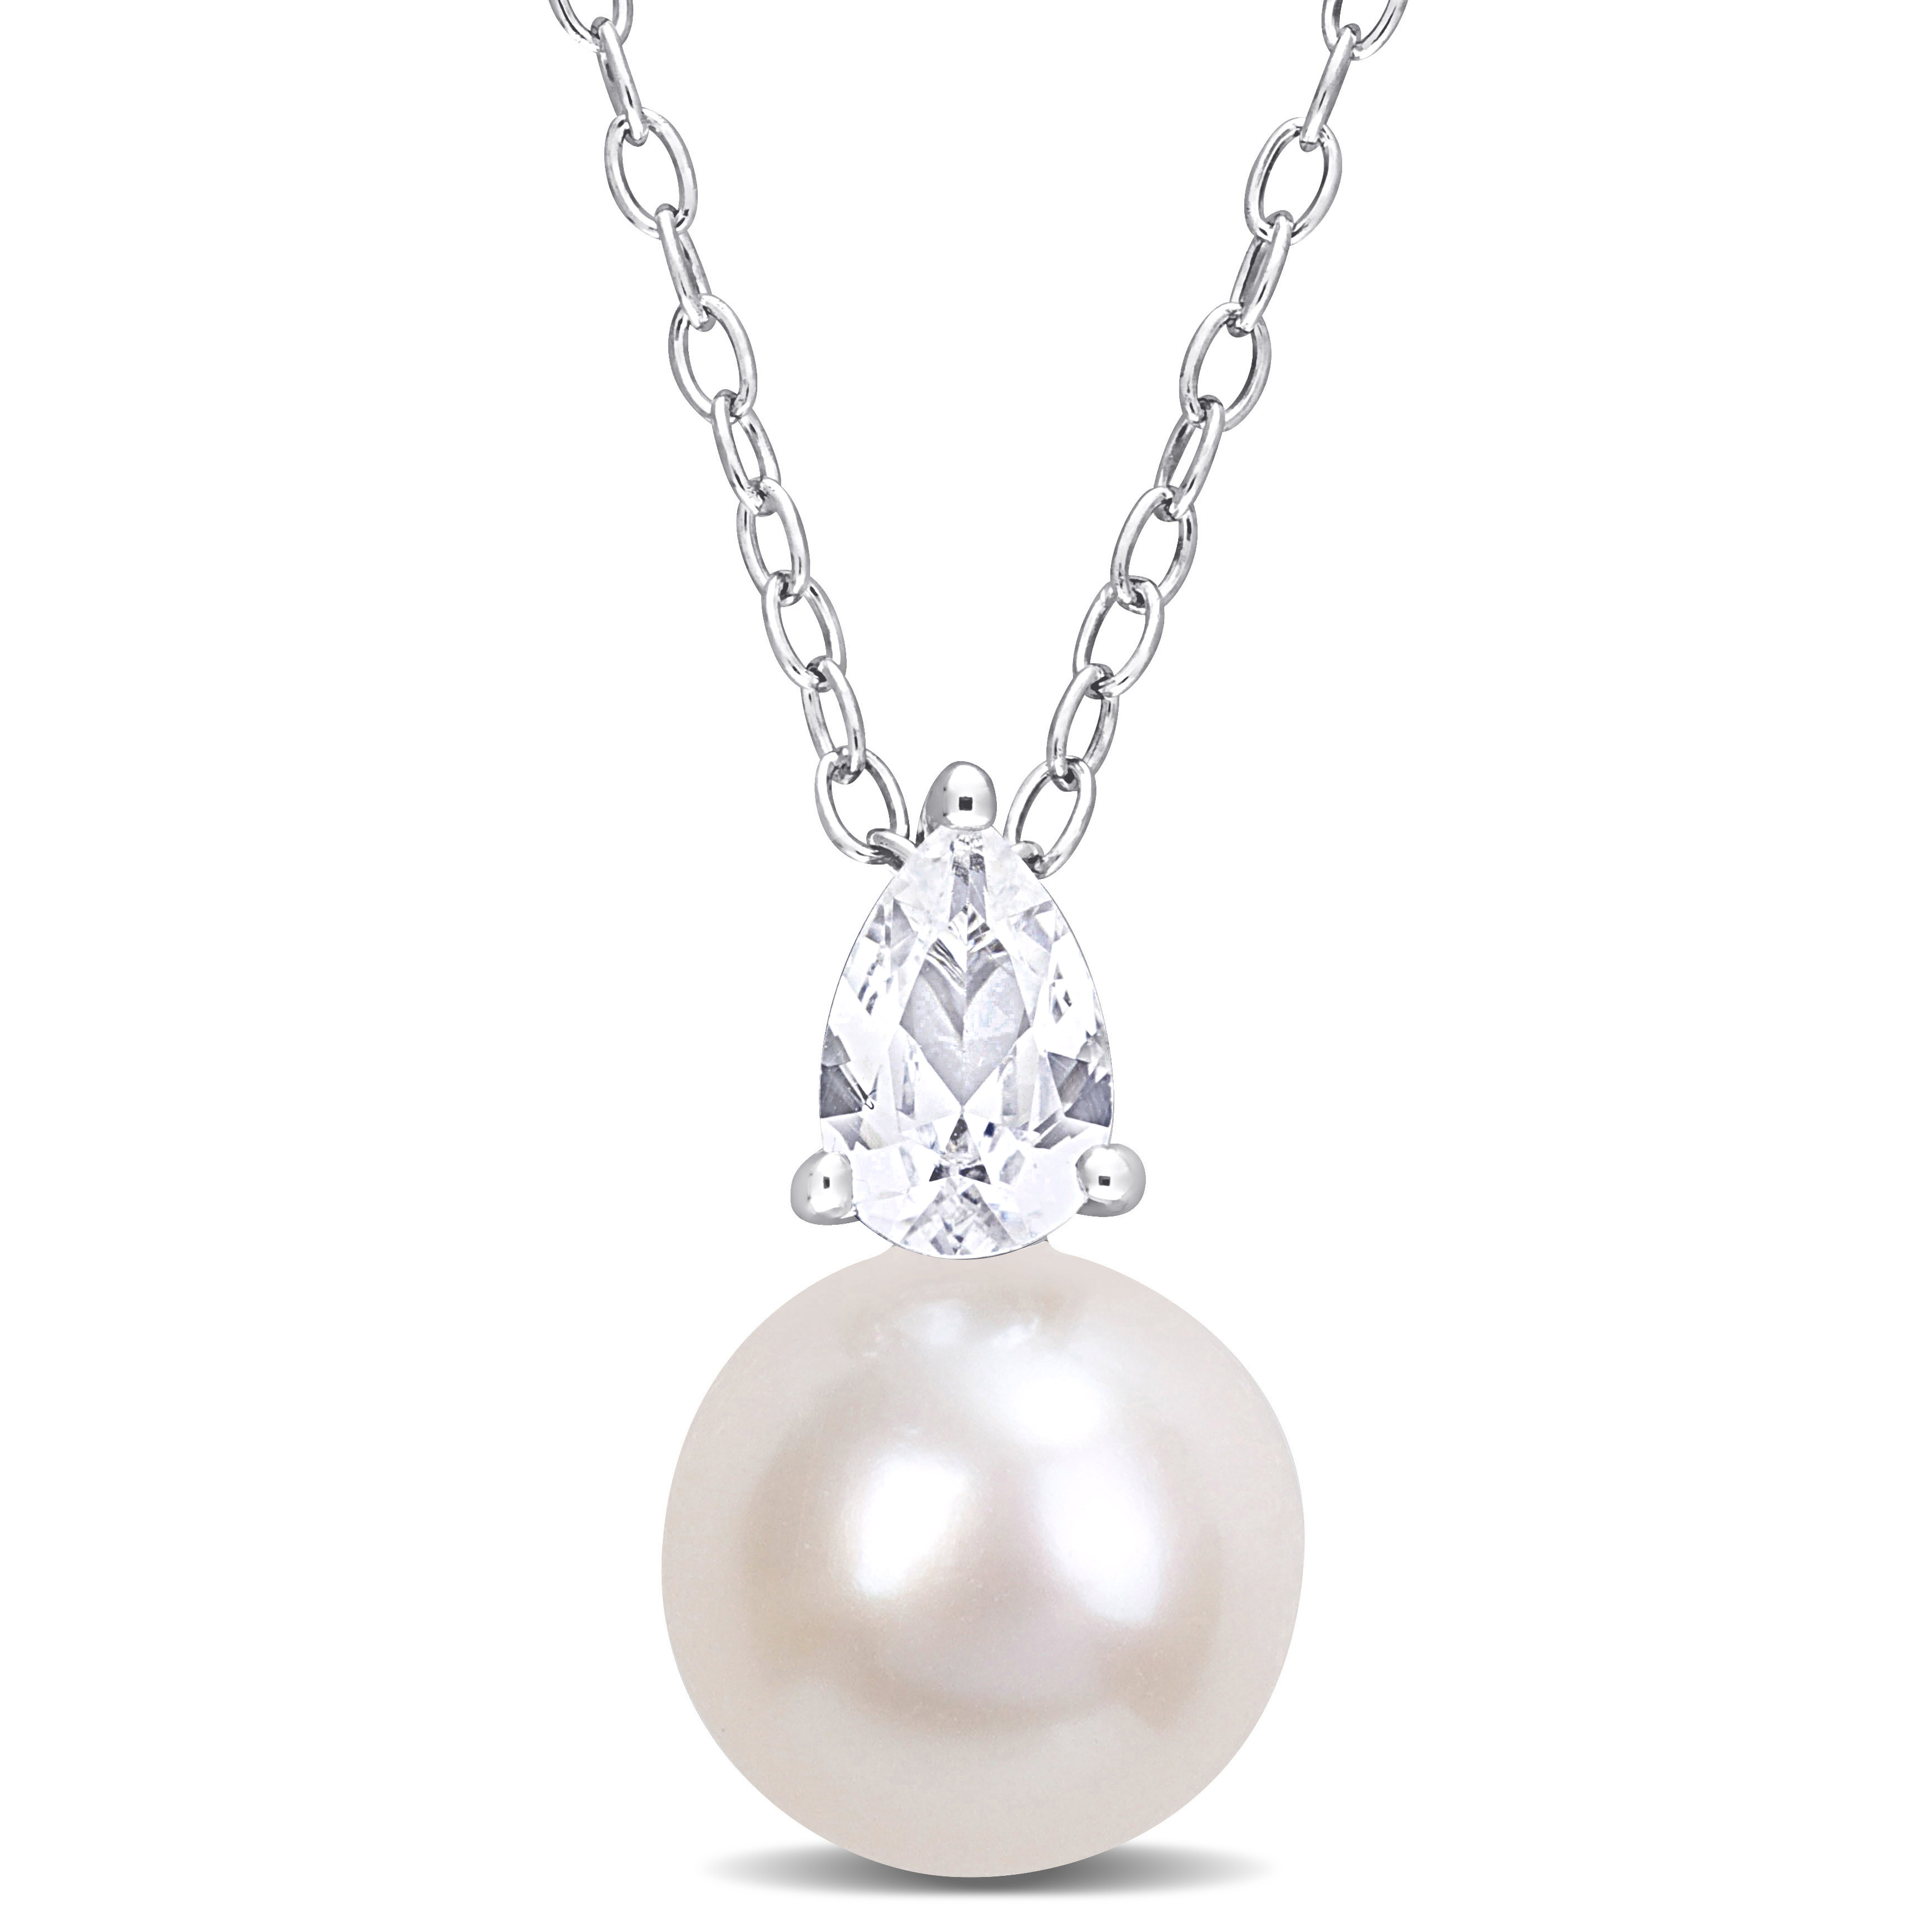 8.5-9 MM White Freshwater Cultured Pearl and 5/8 CT TGW Created White Sapphire Solitaire Pendant with Chain in Sterling Silver